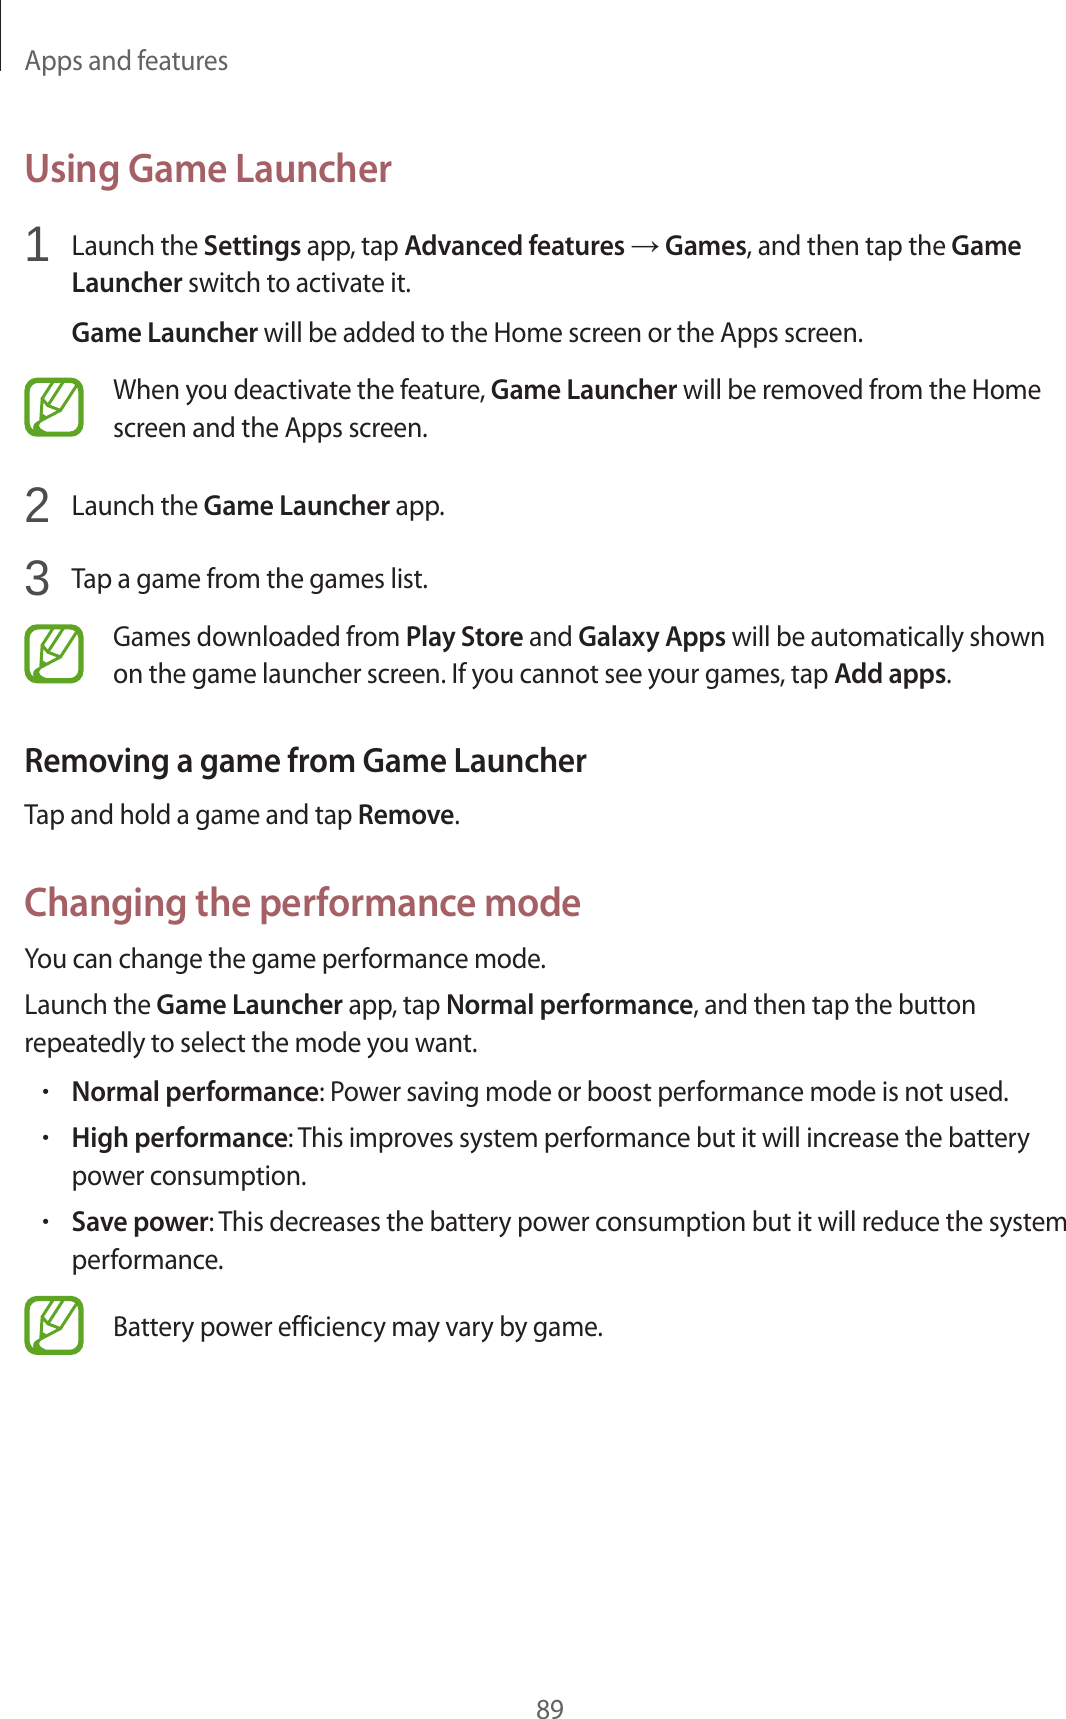 Apps and features89Using Game Launcher1  Launch the Settings app, tap Advanced features → Games, and then tap the Game Launcher switch to activate it.Game Launcher will be added to the Home screen or the Apps screen.When you deactivate the feature, Game Launcher will be removed from the Home screen and the Apps screen.2  Launch the Game Launcher app.3  Tap a game from the games list.Games downloaded from Play Store and Galaxy Apps will be automatically shown on the game launcher screen. If you cannot see your games, tap Add apps.Removing a game from Game LauncherTap and hold a game and tap Remove.Changing the performance modeYou can change the game performance mode.Launch the Game Launcher app, tap Normal performance, and then tap the button repeatedly to select the mode you want.•Normal performance: Power saving mode or boost performance mode is not used.•High performance: This improves system performance but it will increase the battery power consumption.•Save power: This decreases the battery power consumption but it will reduce the system performance.Battery power efficiency may vary by game.